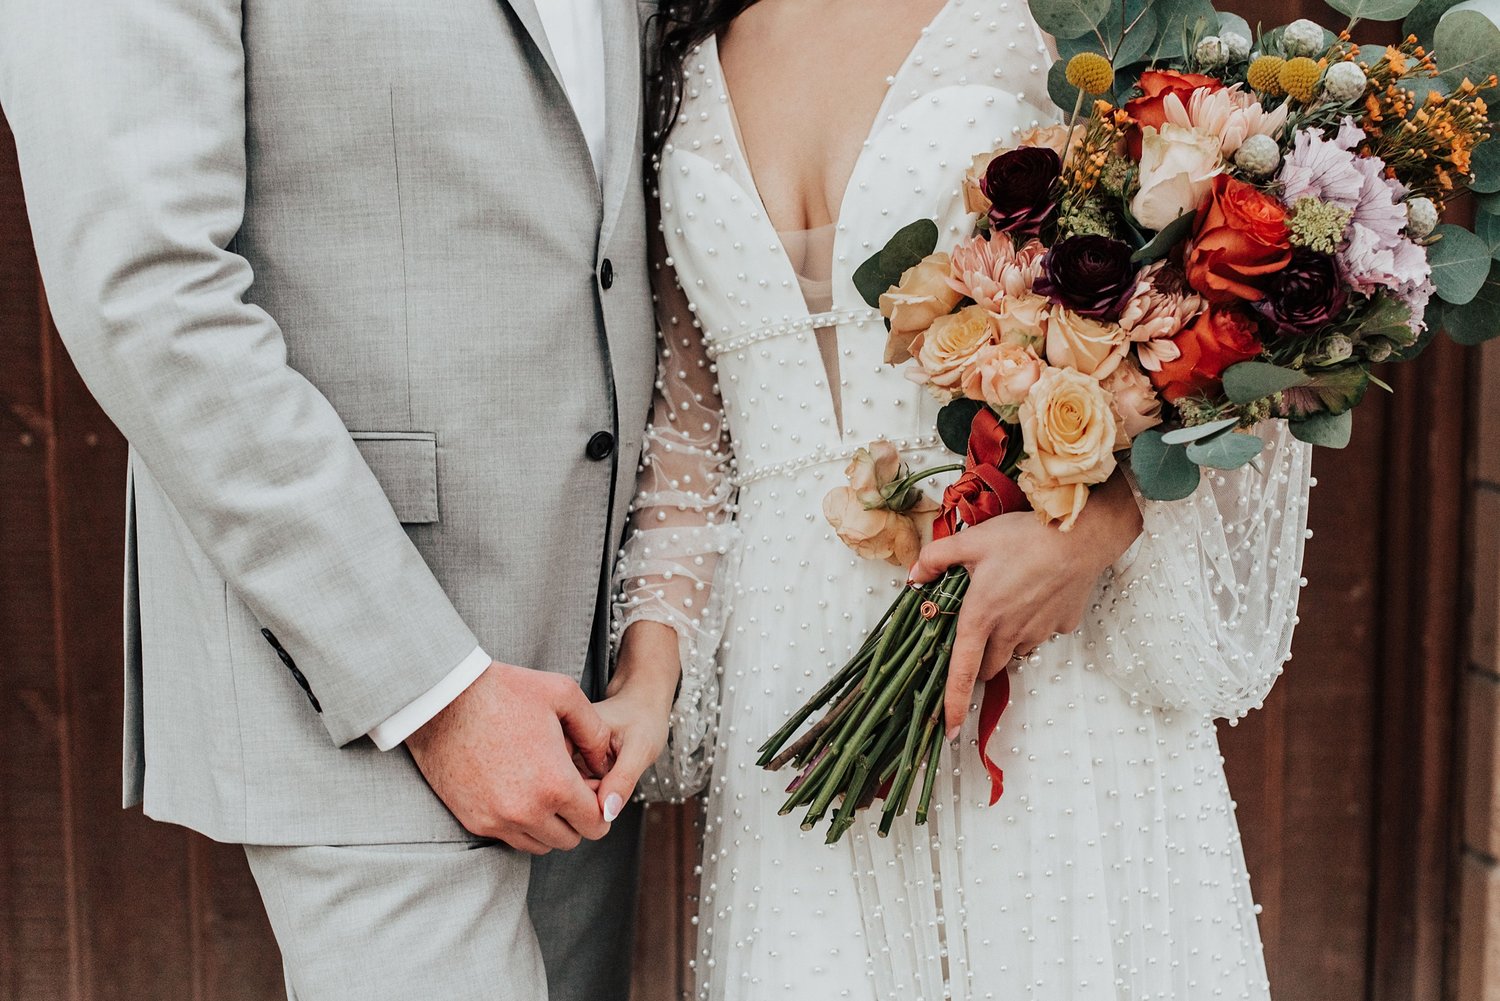 Wedding Inspo - Our Fave Pink and Red Details — Alicia Lucia Photography:  Albuquerque and Santa Fe New Mexico Wedding and Portrait Photographer